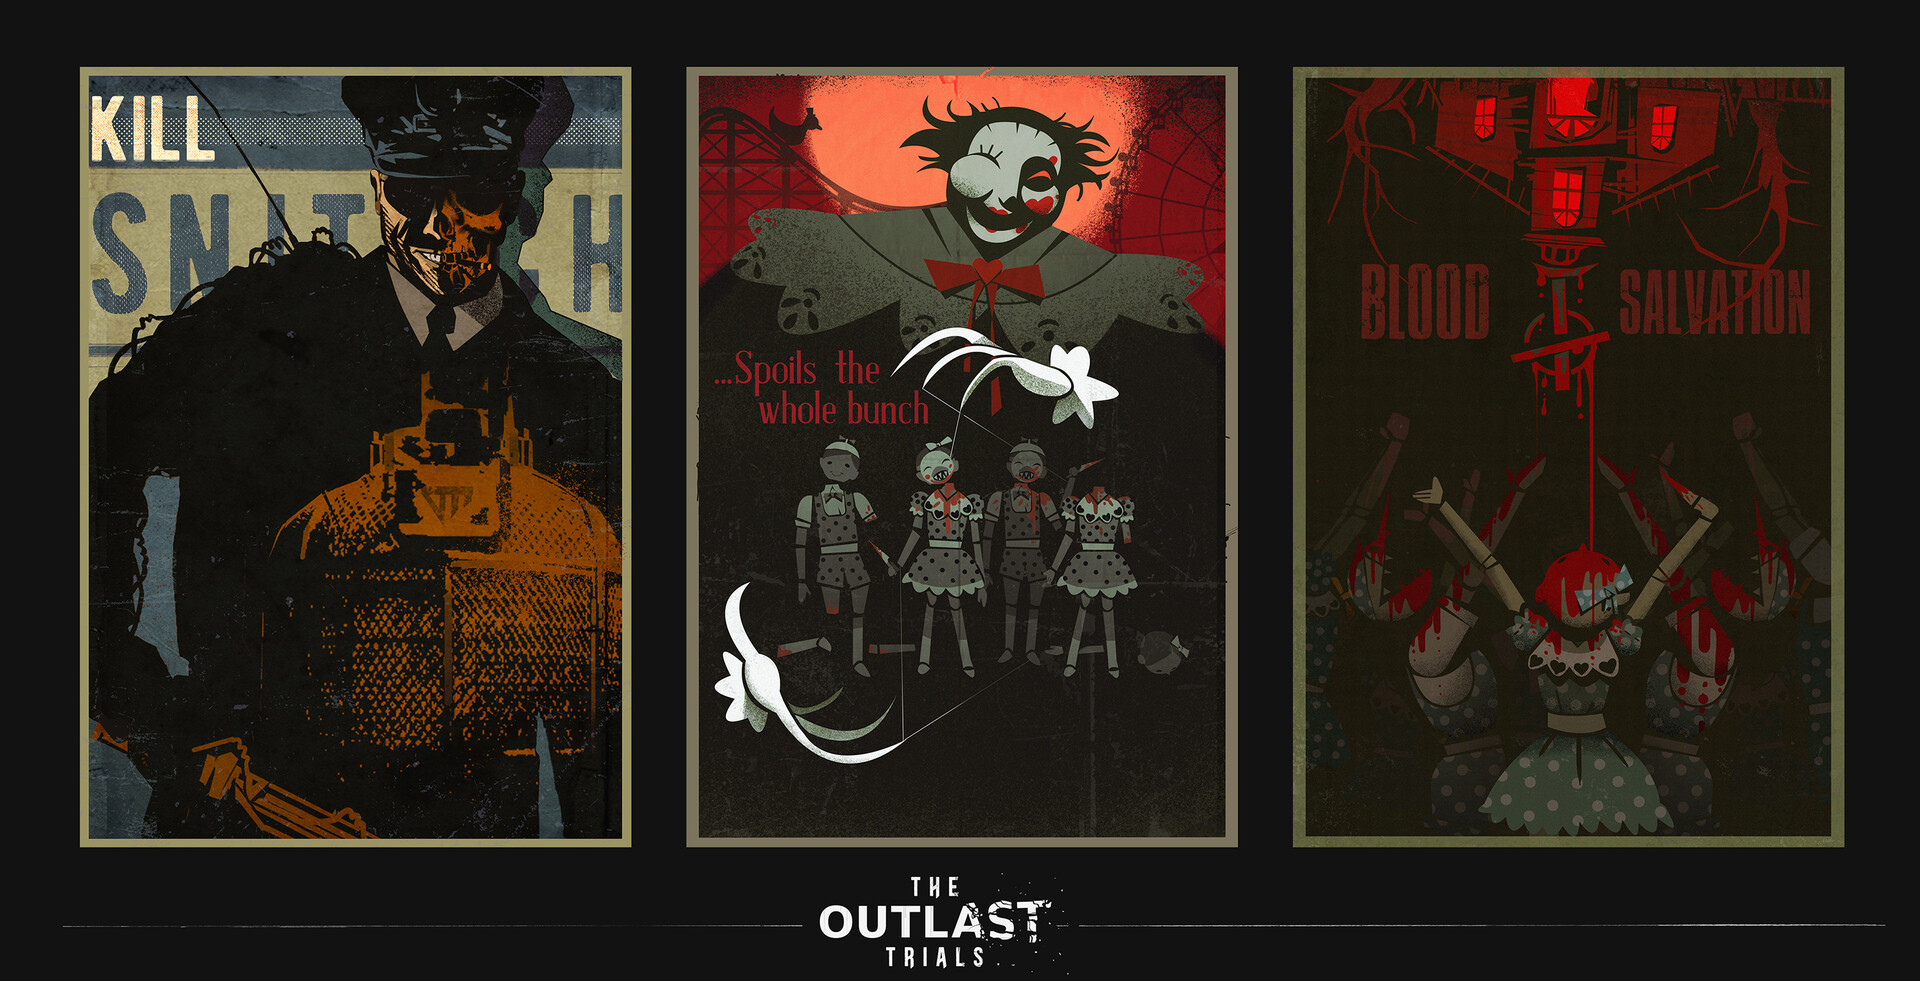 The Outlast Trials Poster Gaming Poster 4 Colors Video Game 